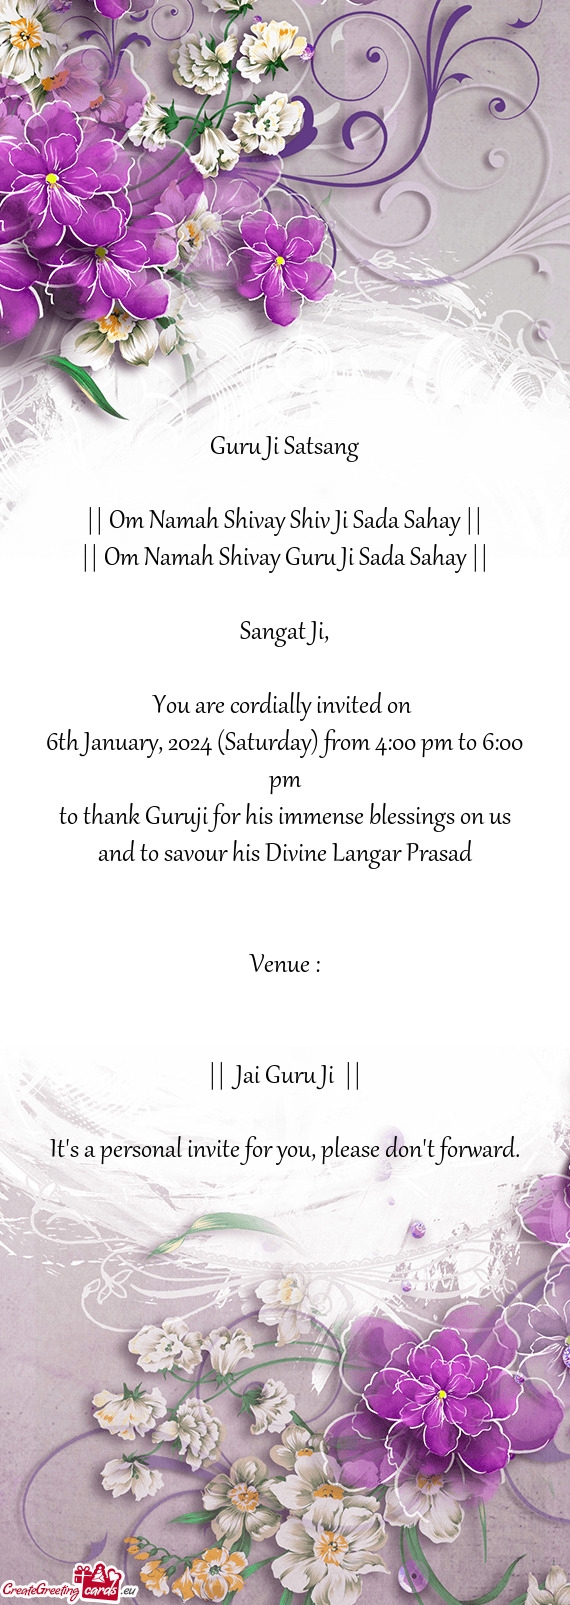 6th January, 2024 (Saturday) from 4:00 pm to 6:00 pm